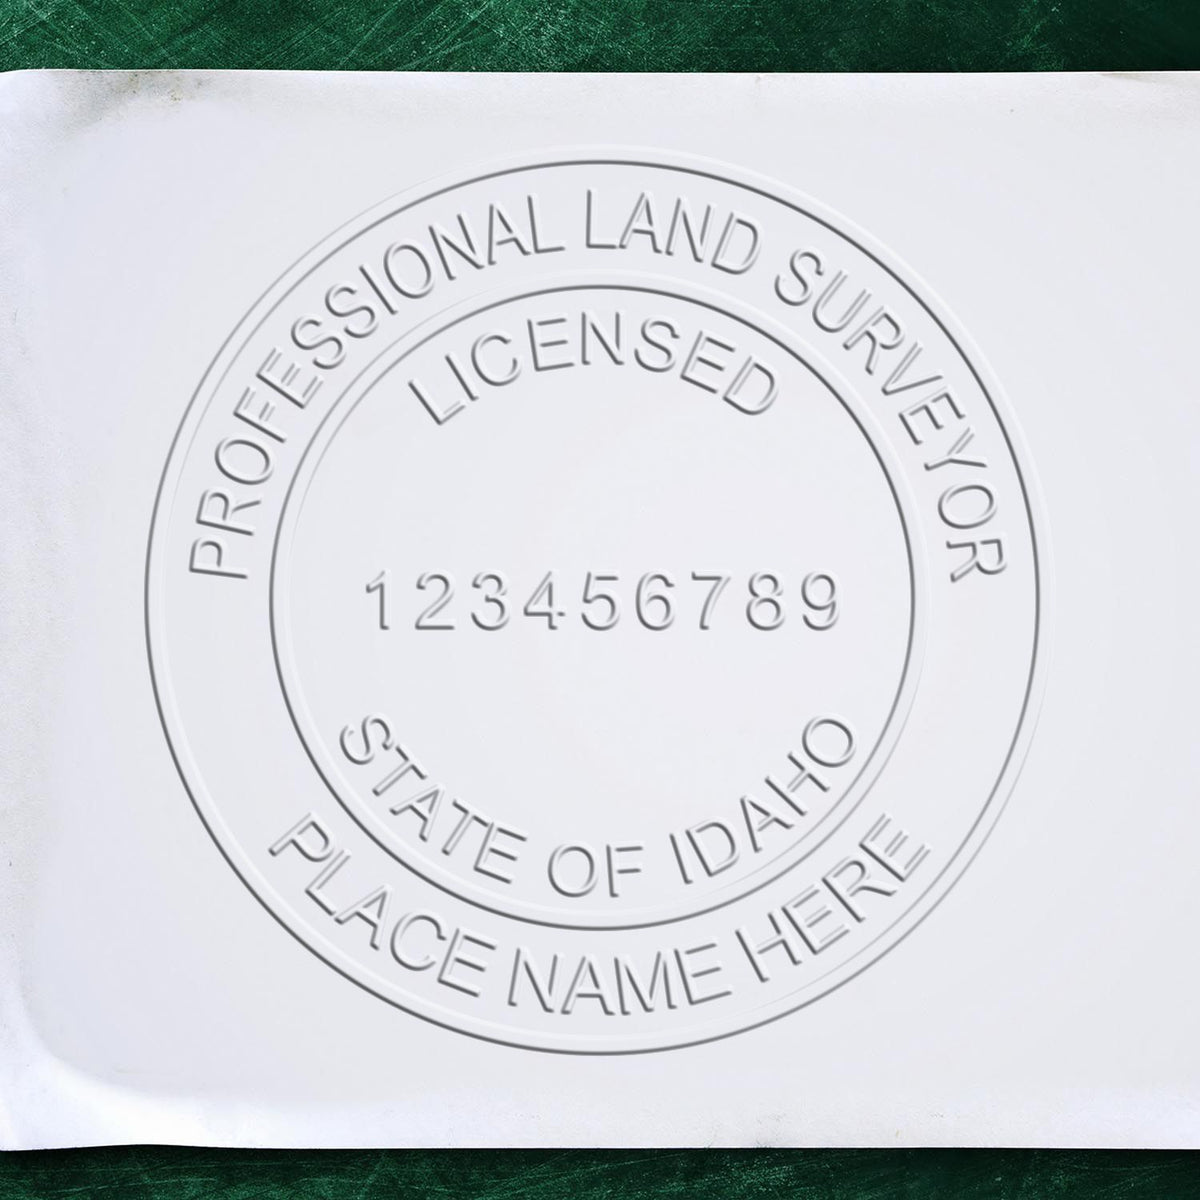 An in use photo of the Hybrid Idaho Land Surveyor Seal showing a sample imprint on a cardstock